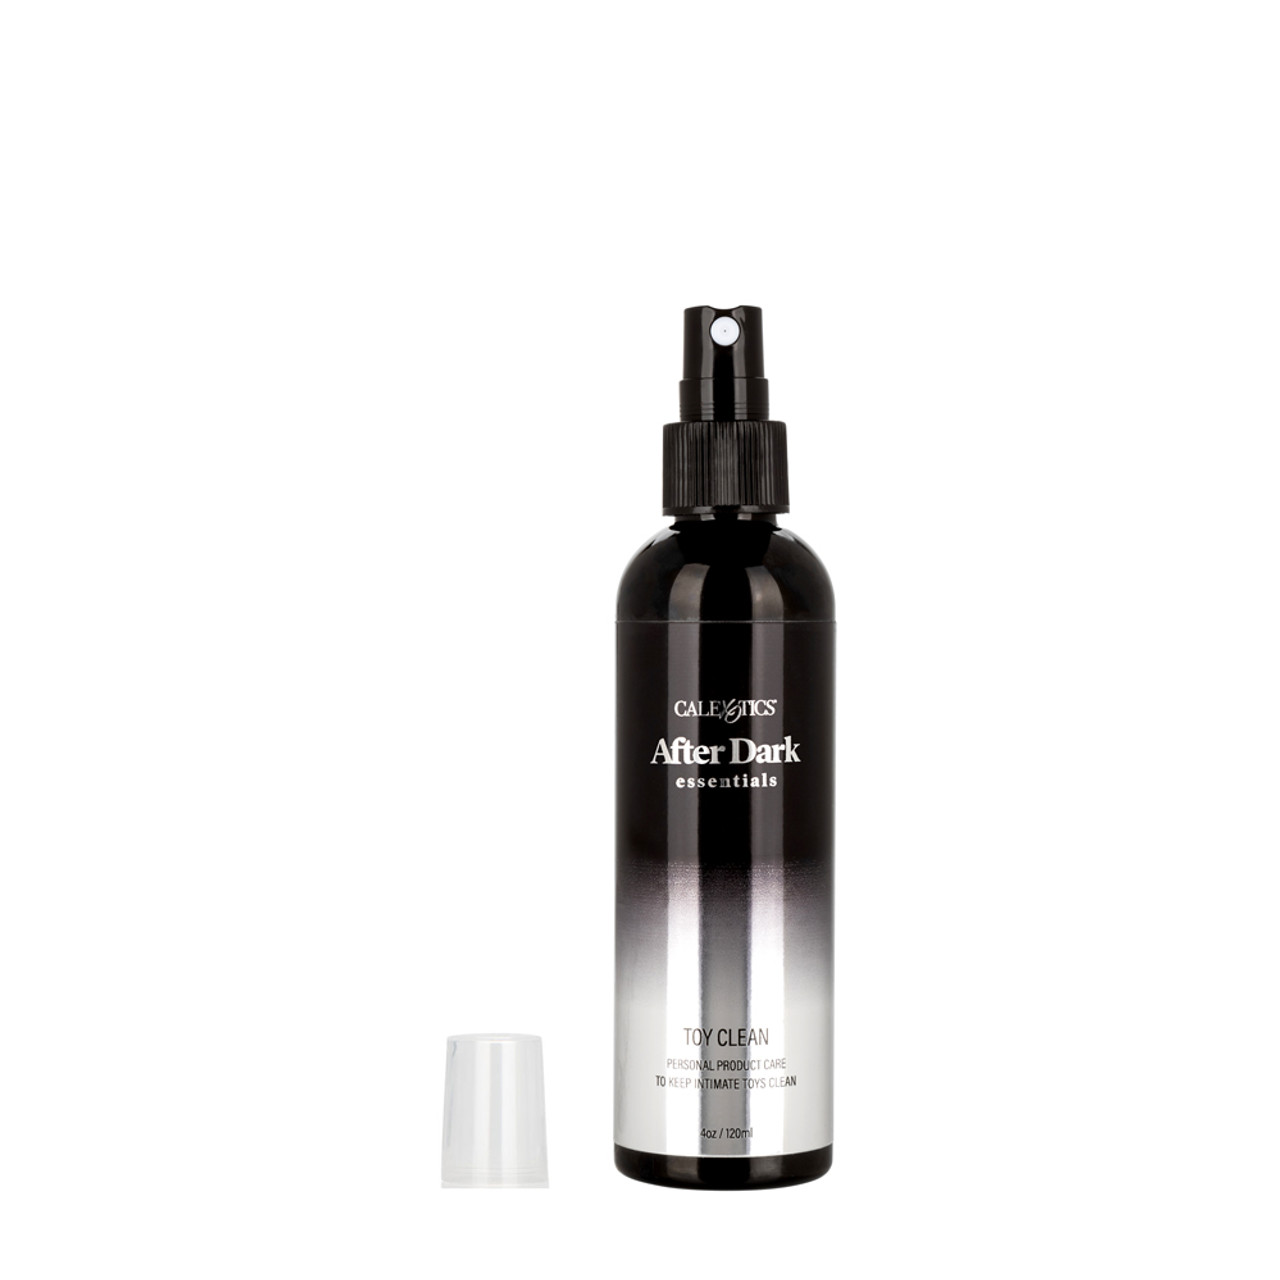 Buy the After Dark Essentials Foam Toy Clean Foaming Intimate Cleanser ...